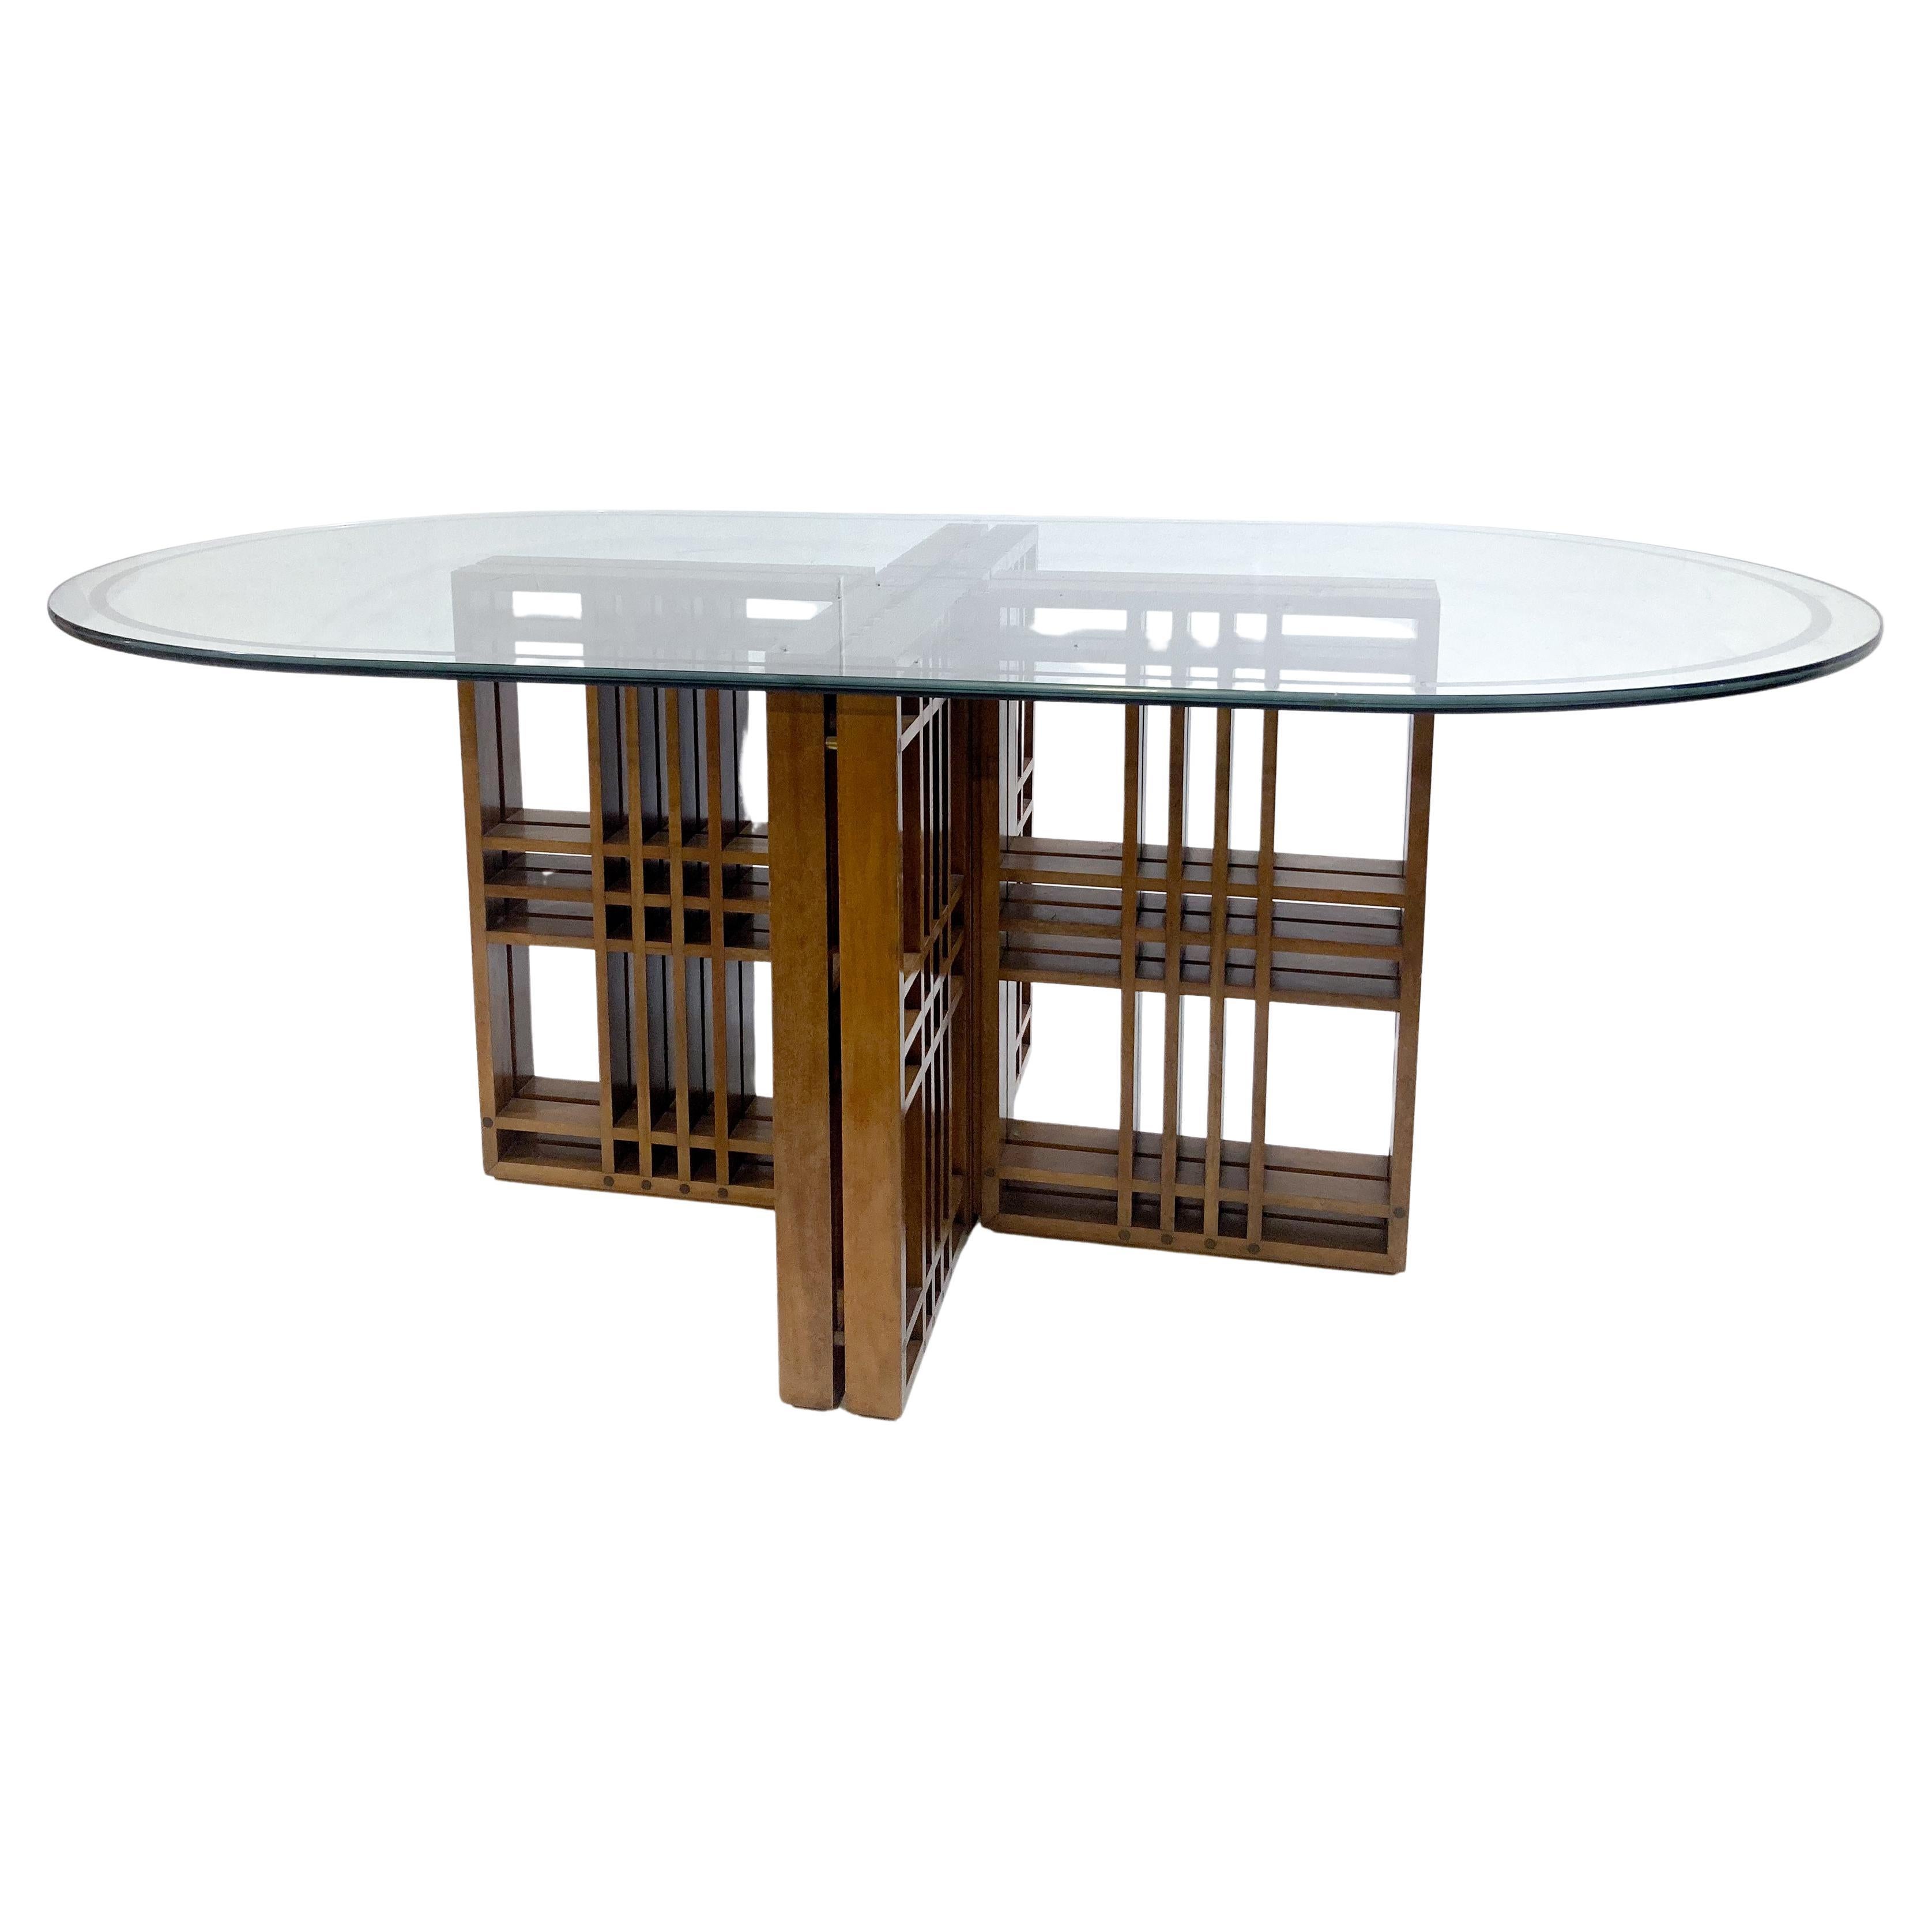 Mid-Century Modern Italian Dining Table, Wood and Glass, 1960s For Sale